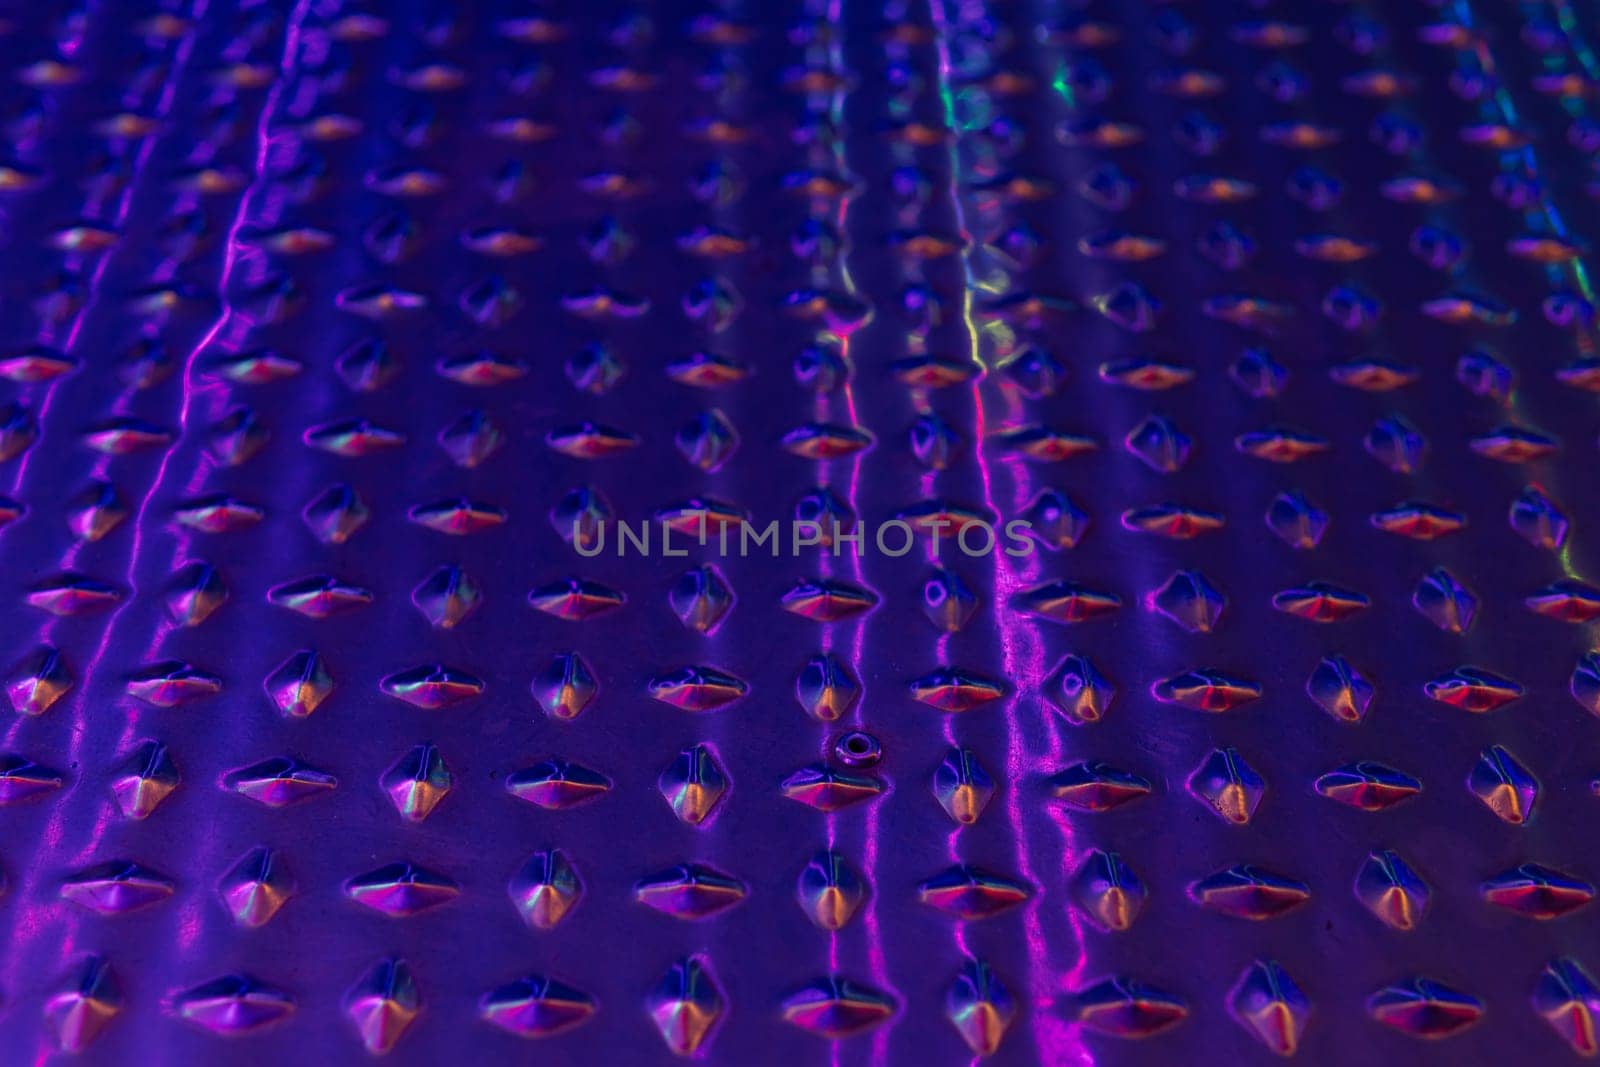 Abstract shiny purple texture surface background close up view. High quality photo